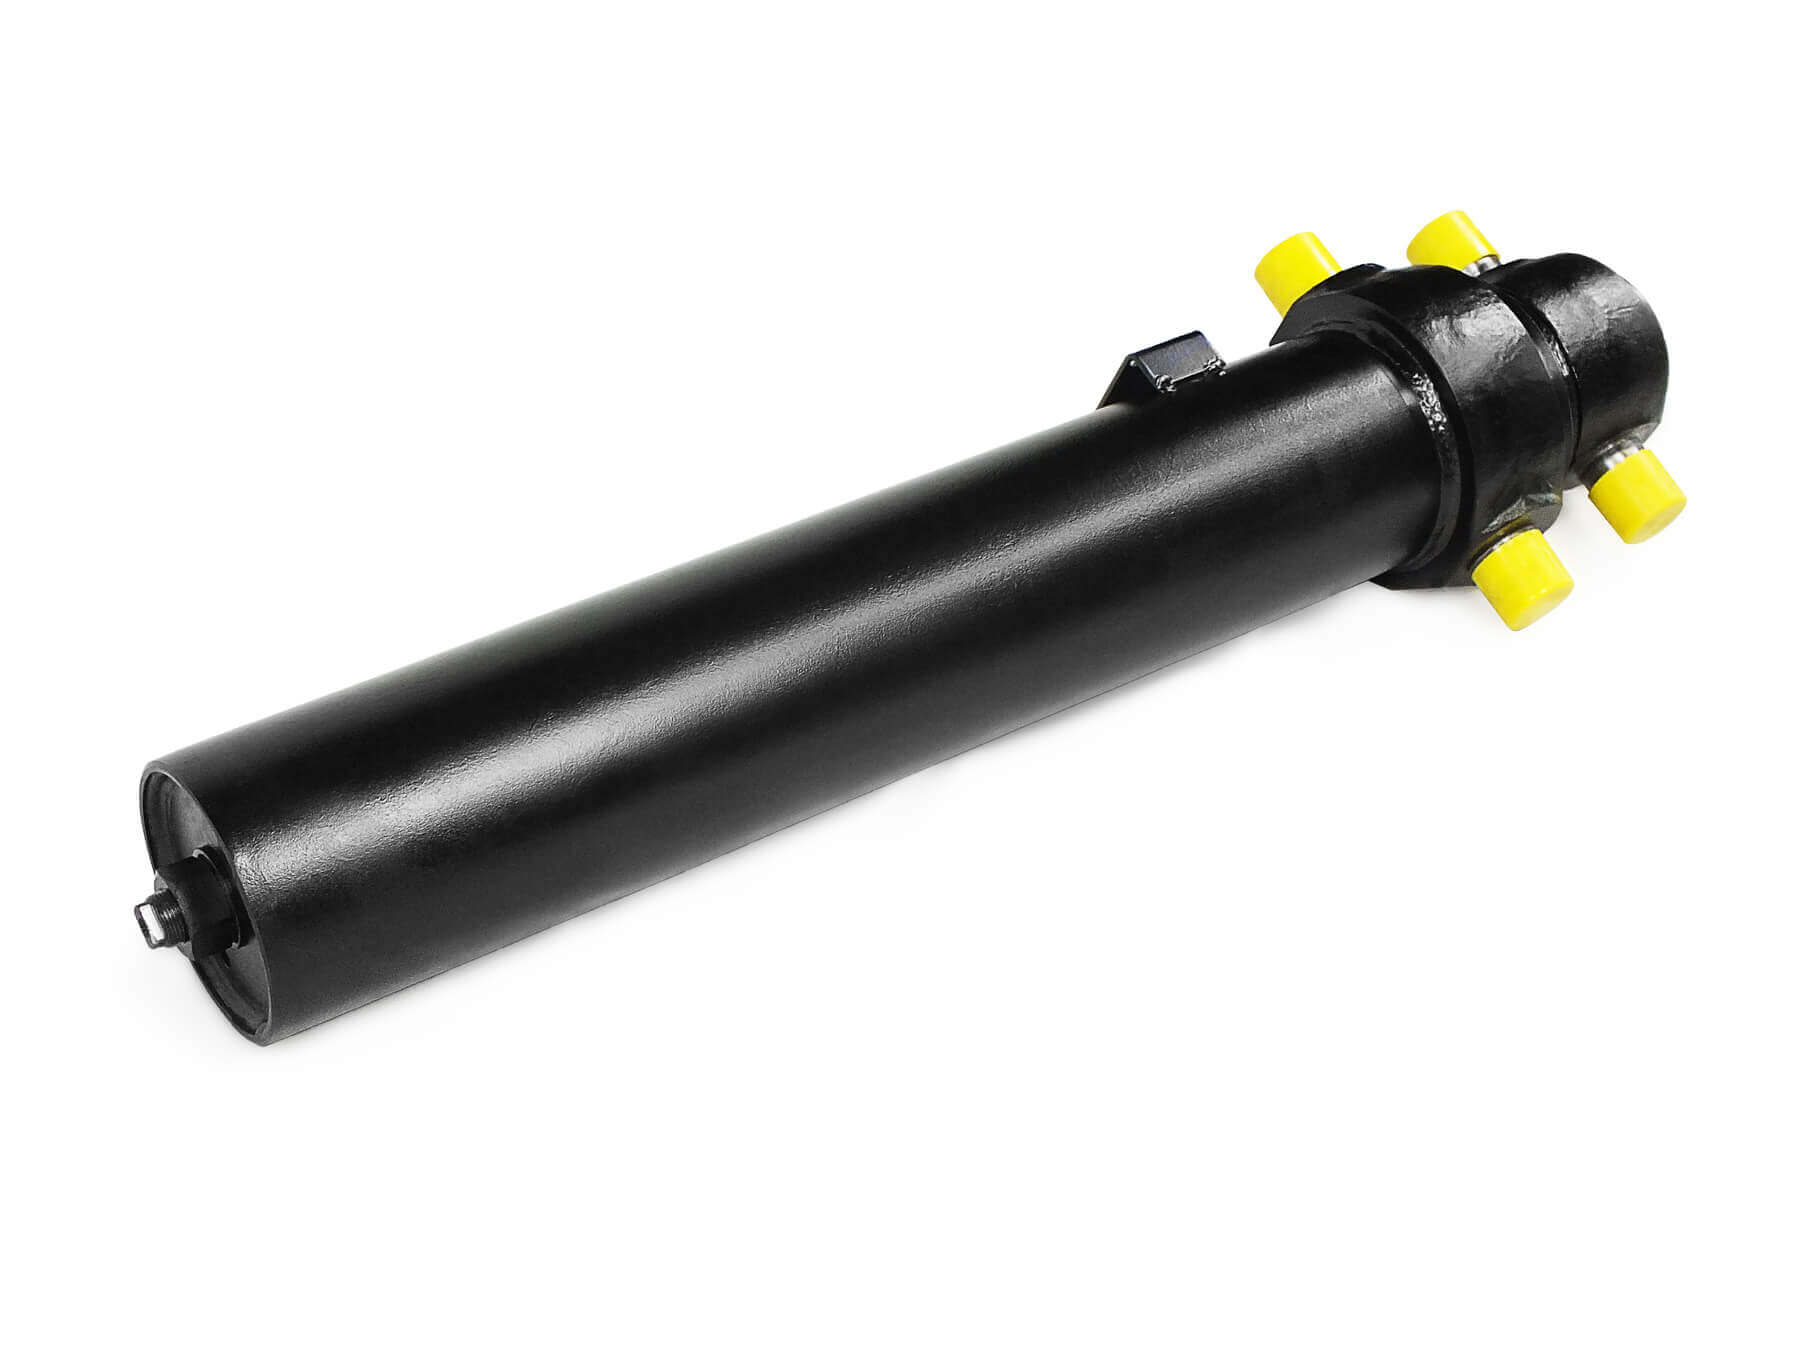 Parker Hydraulic Cylinder Specifications